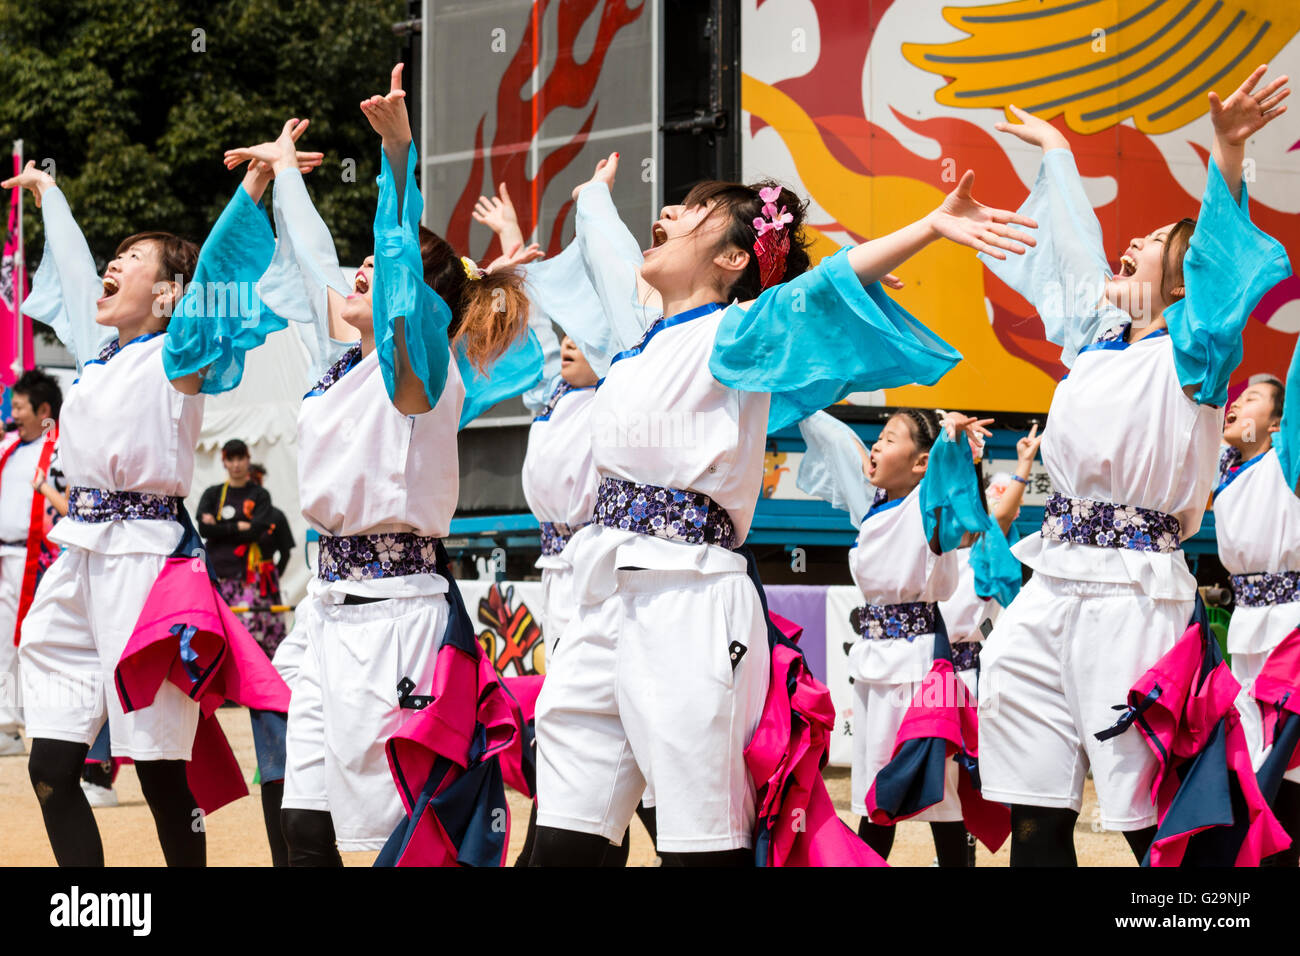 Women team in white and turquoise happi jackets, dancing outdoors, in rows, during the Hinokuni Yosakoi dance festival in Kumamoto, Japan. Stock Photo